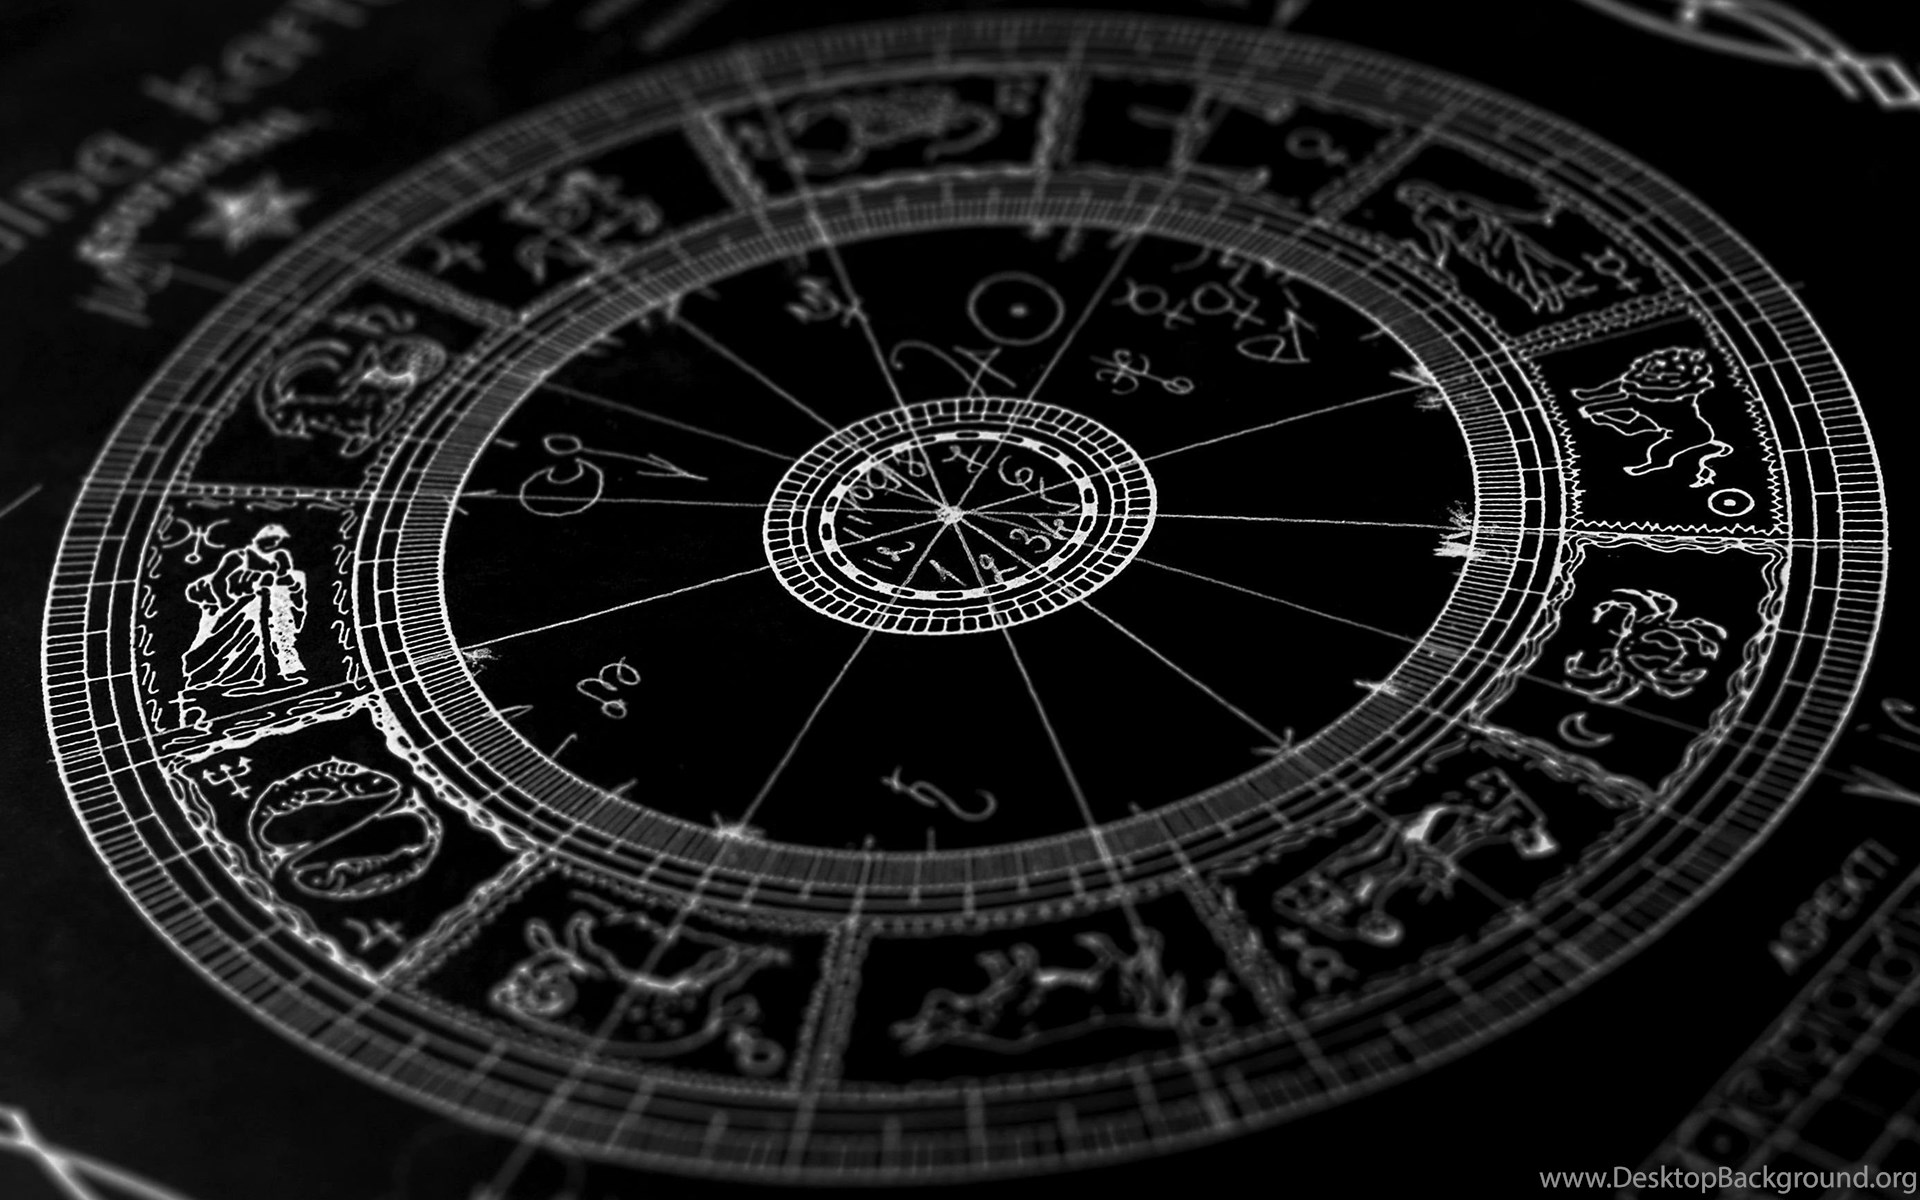 Signs Of The Zodiac, A Beautiful Picture On A Black Background. Desktop Background